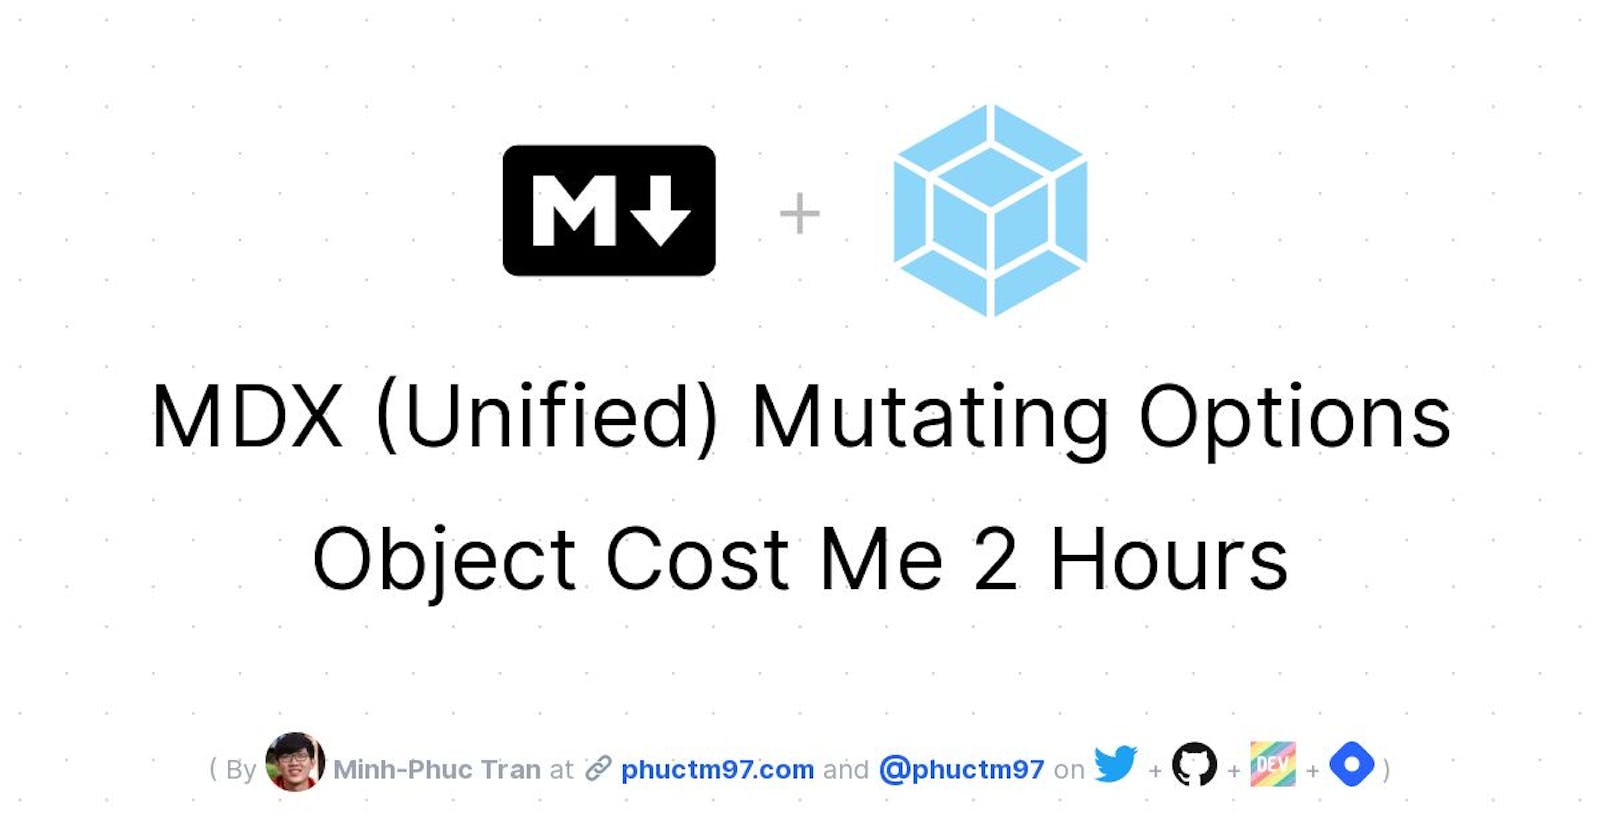 MDX (Unified) Mutating Options Object Cost Me 2 Hours